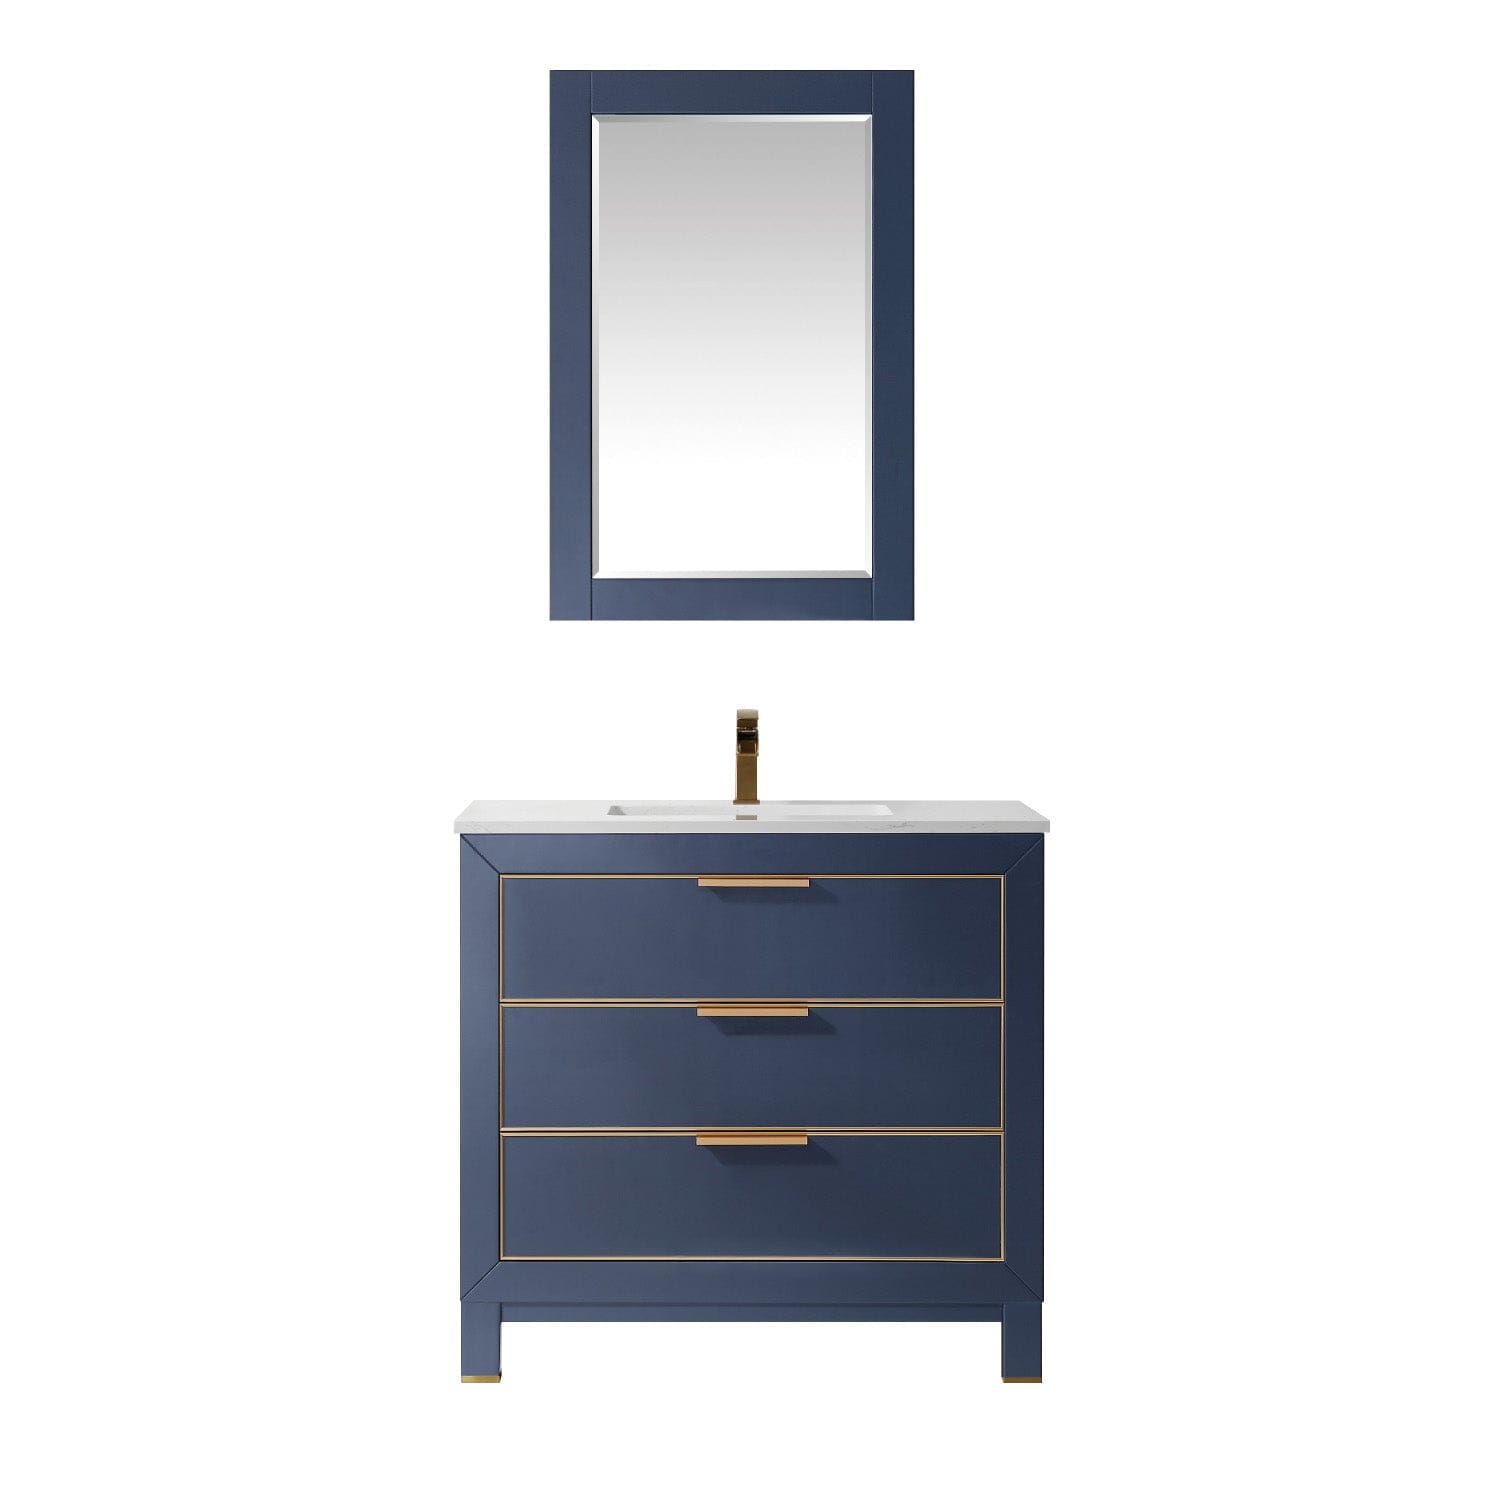 Altair Jackson 36" Single Bathroom Vanity Set in Royal Blue and Composite Carrara White Stone Countertop with Mirror 533036-RB-AW - Molaix631112971577Vanity533036-RB-AW